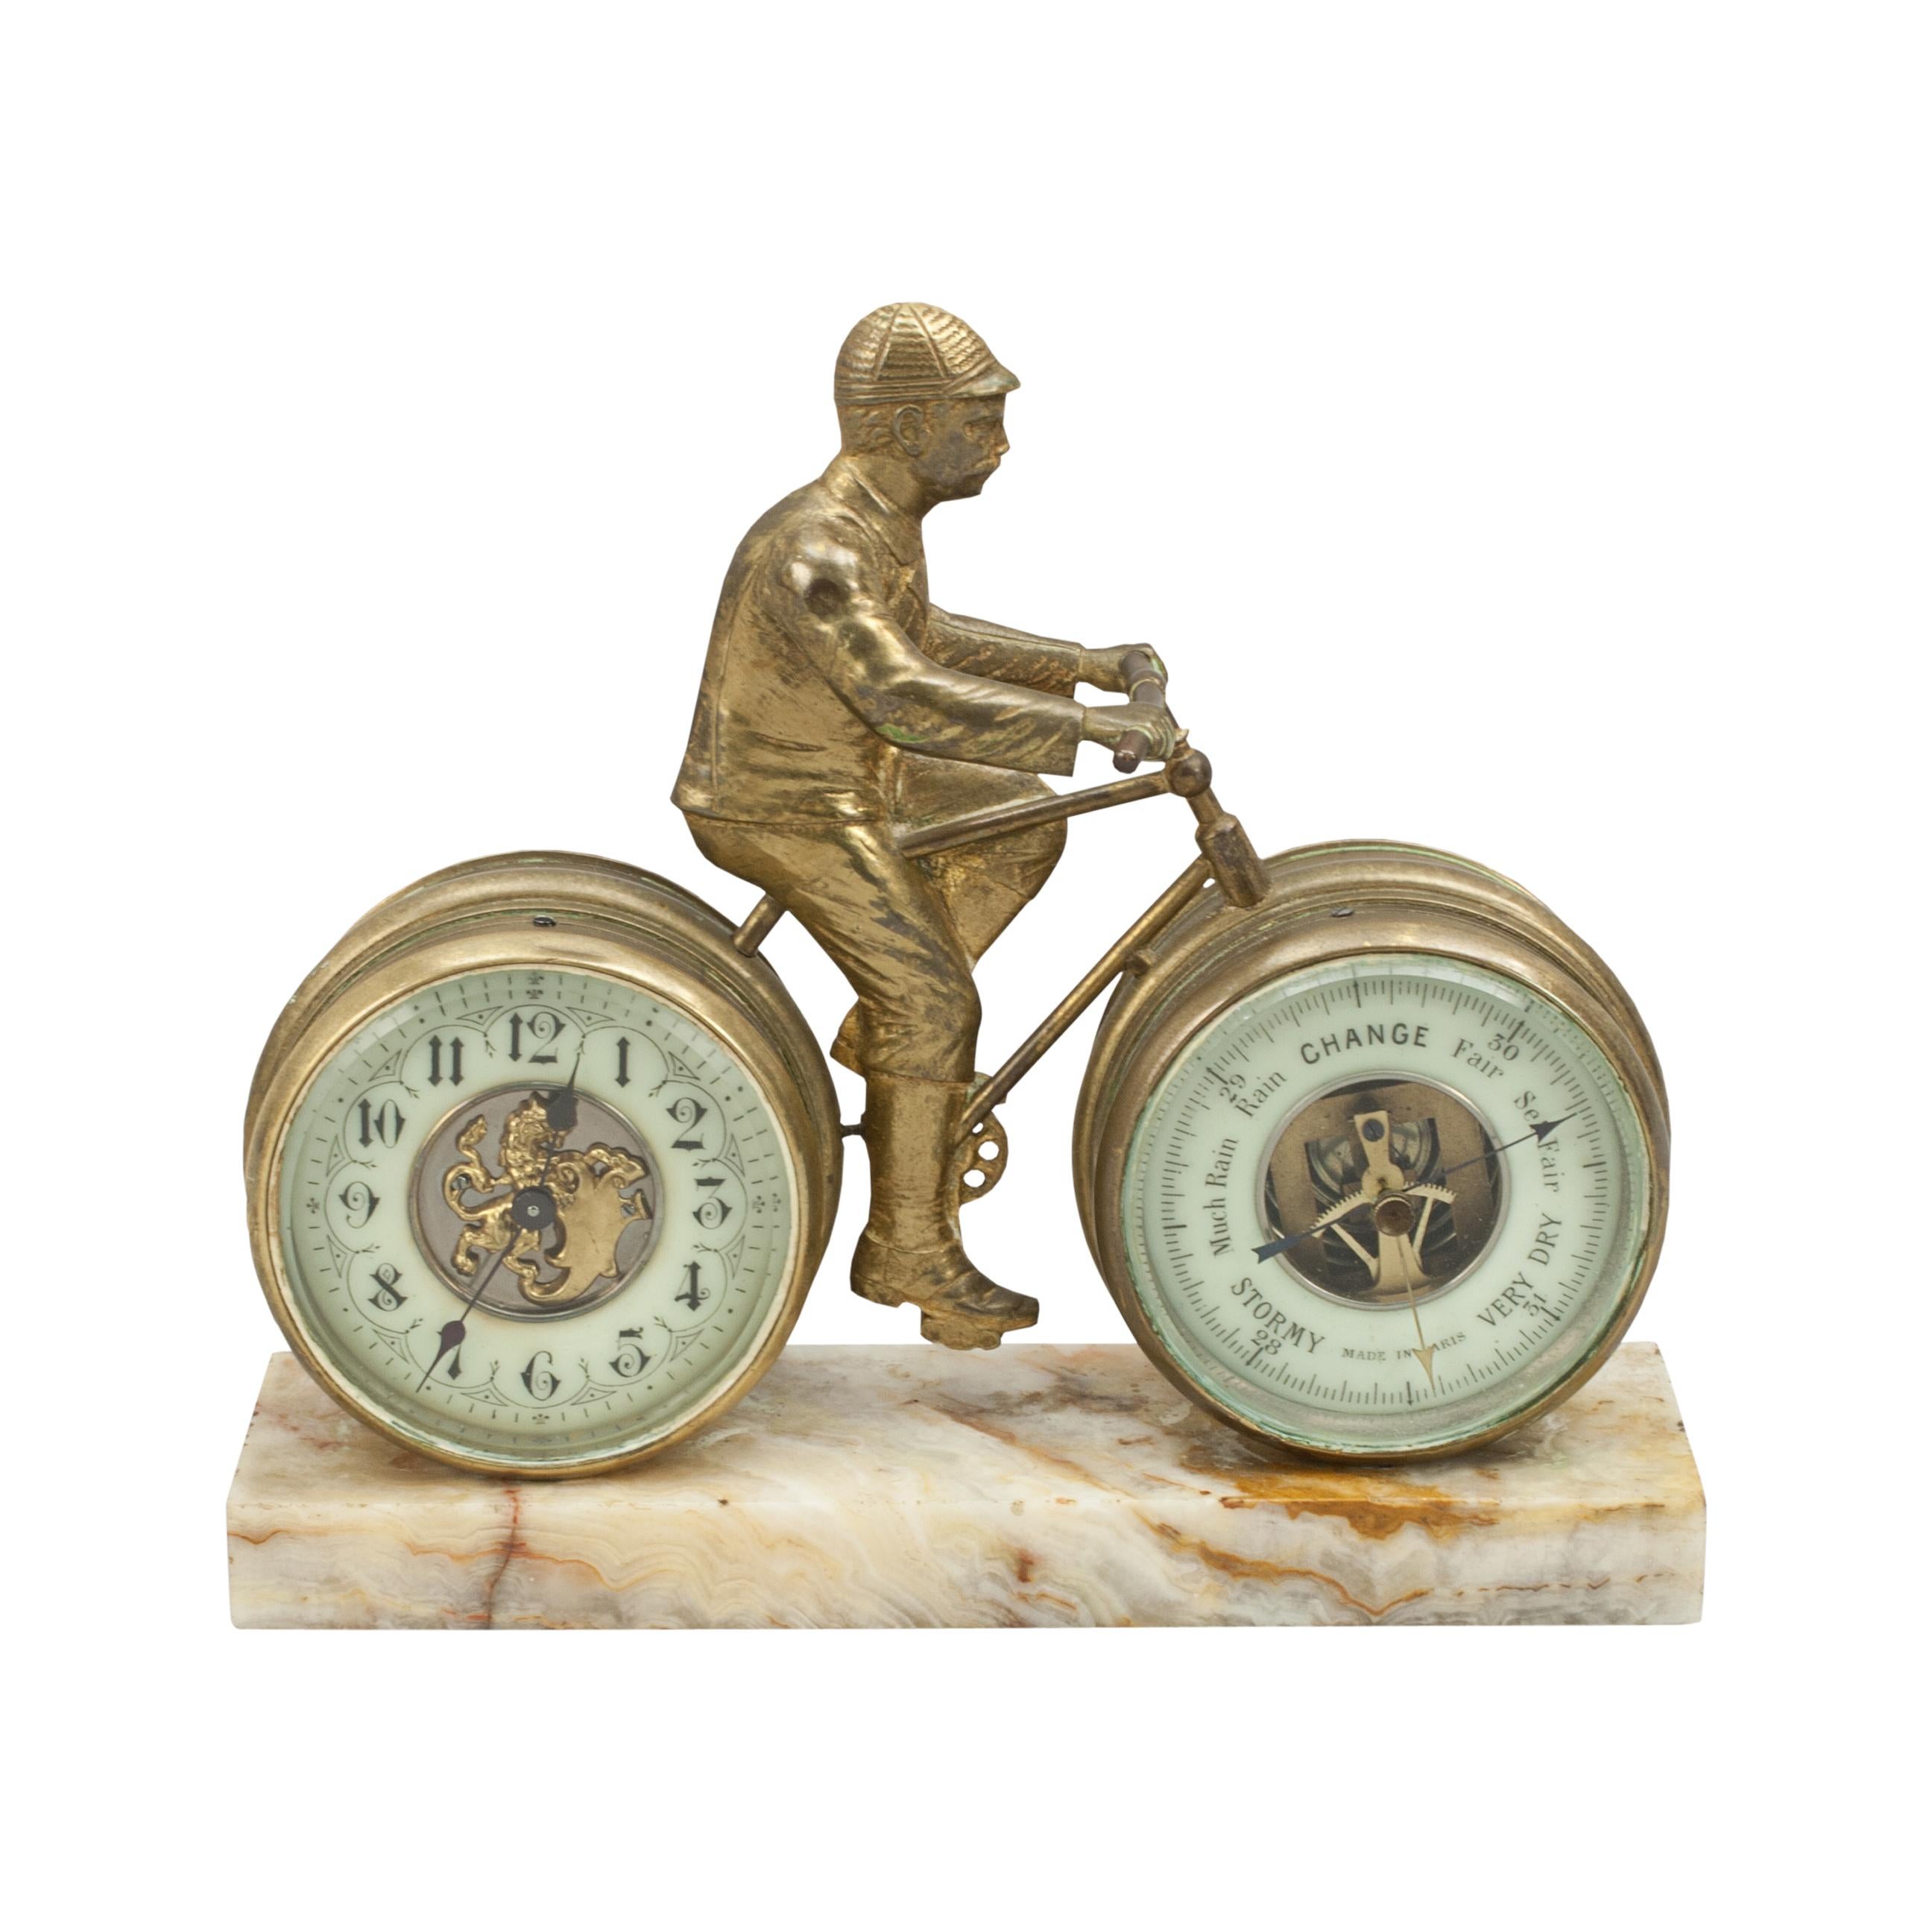 Novelty Desk Cycling Clock with Barometer